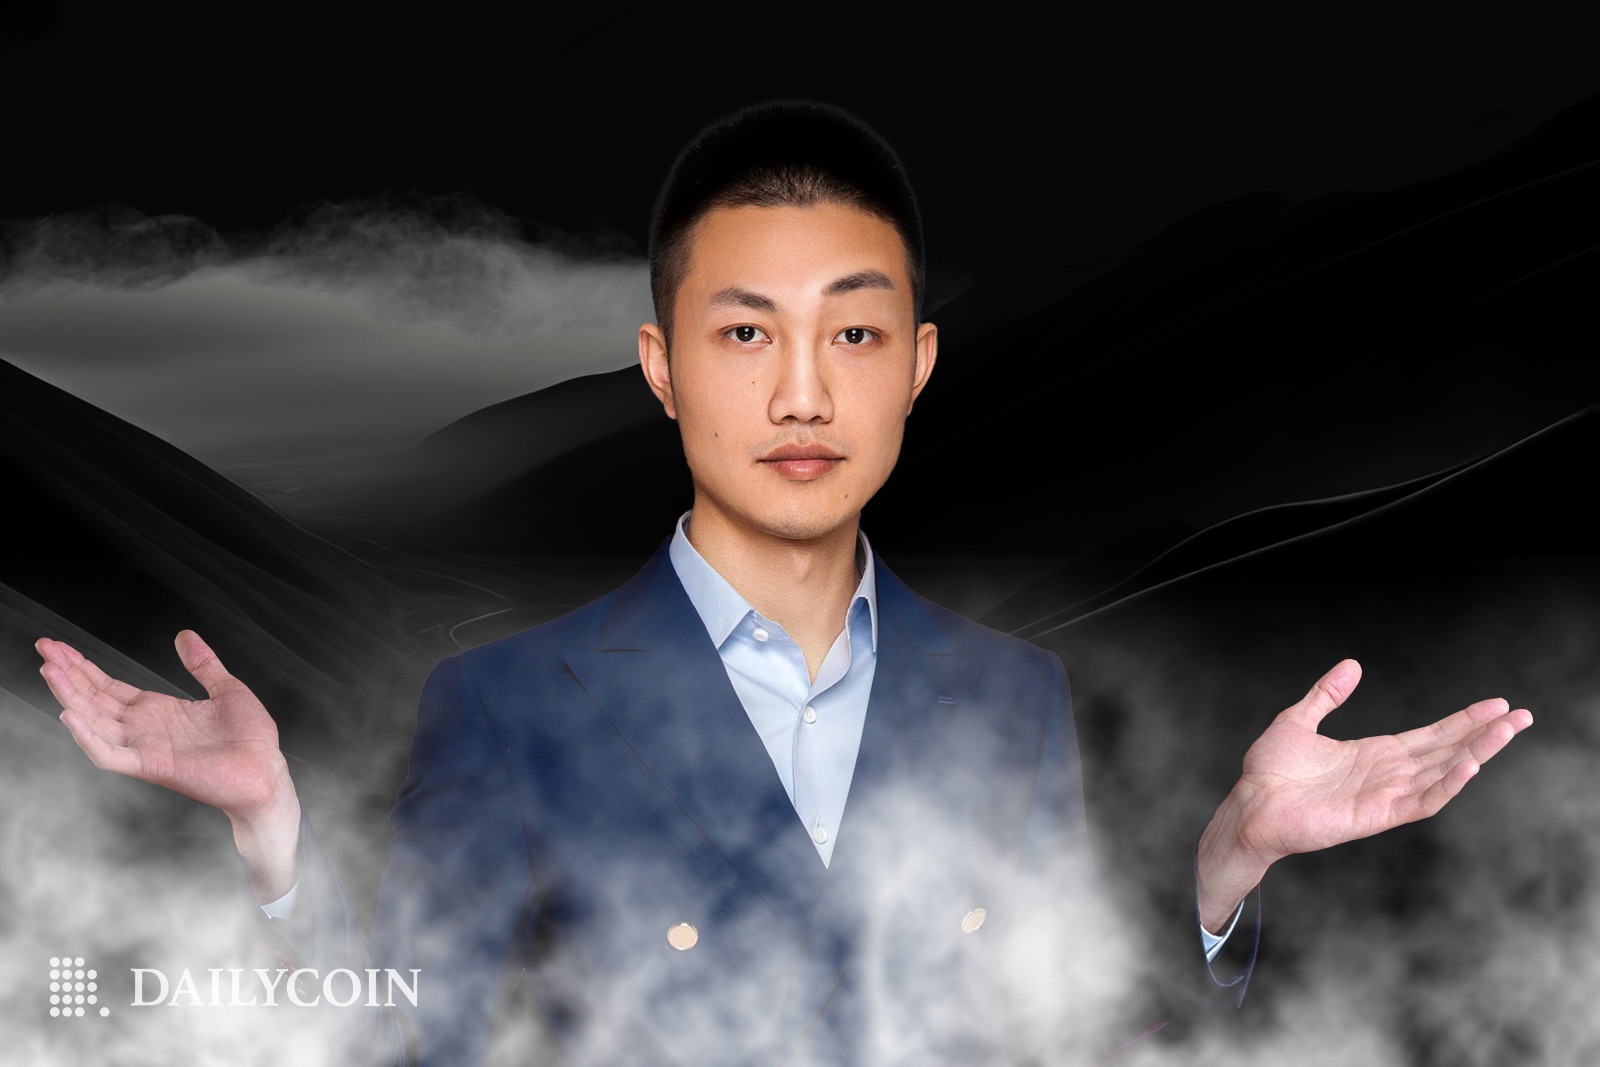 KuCoin CEO Johnny Lyu is looking for legal documents from New York, but the mail hasn't arrived yet.